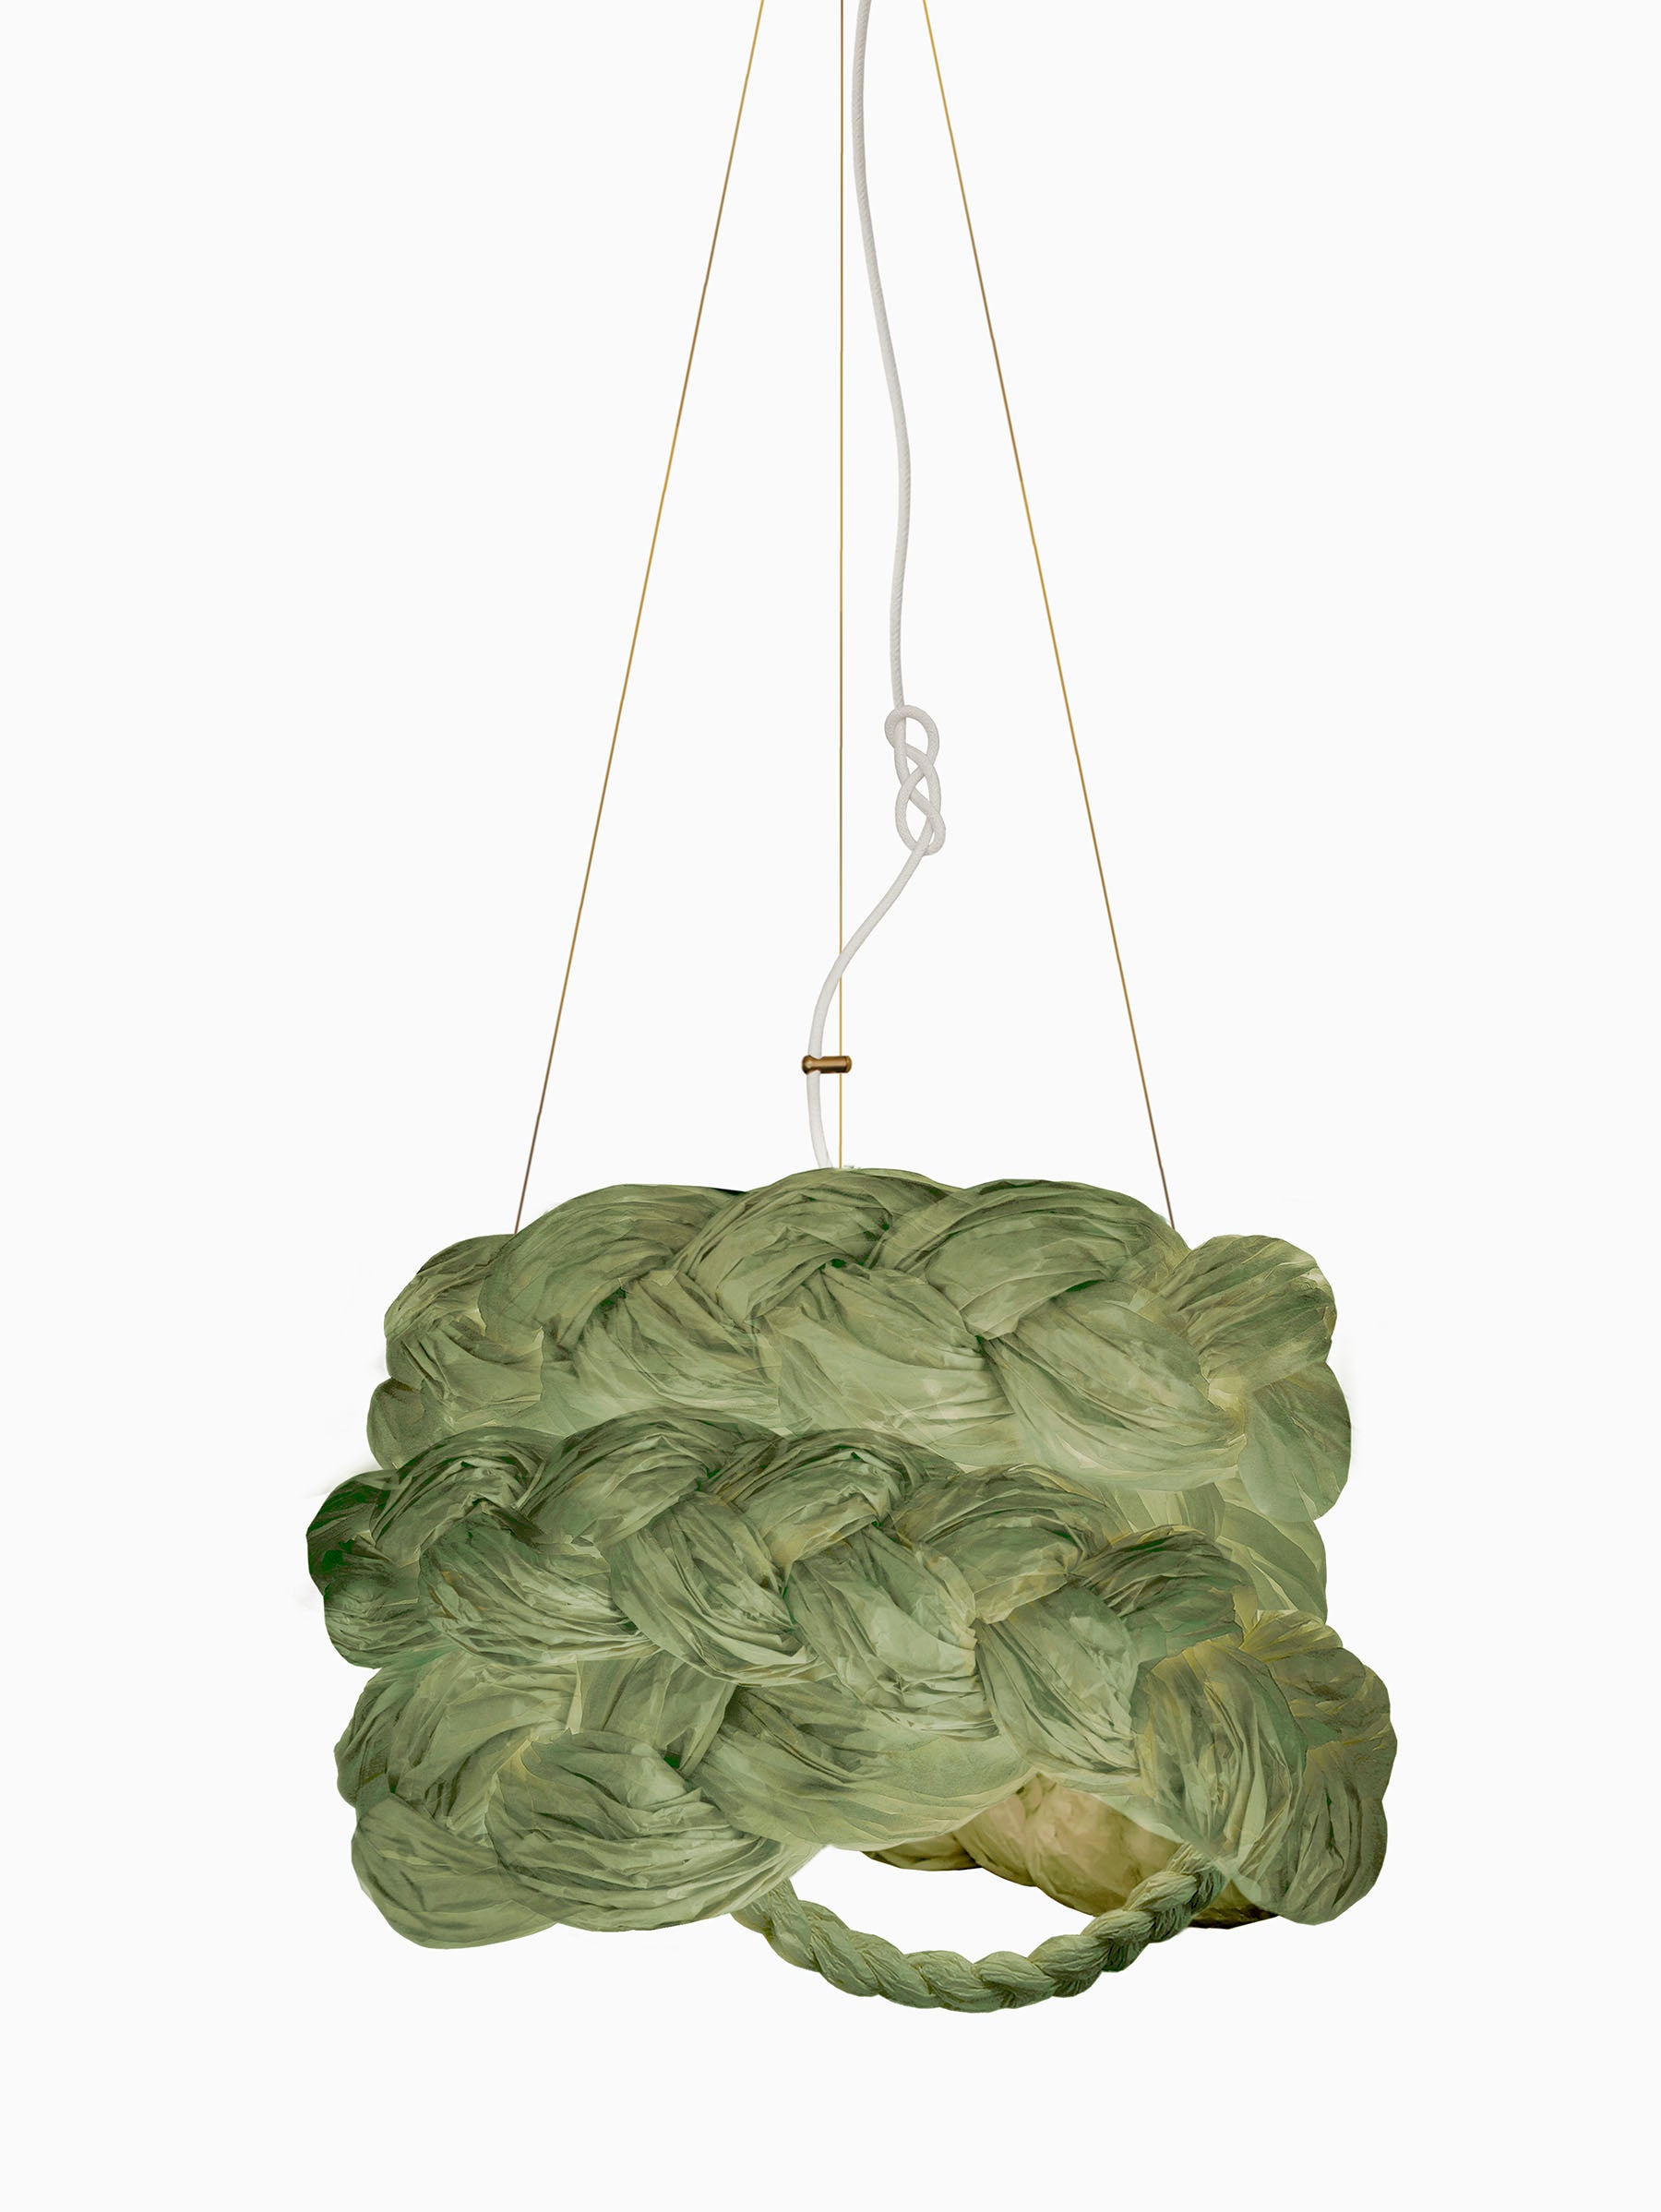 Mint Paper Braided Unique Handmade Pendant Lamp | Cozy Atmosphere Lighting | Contemporary Natural Lighting for Living room,  Bedroom & Lobby | Sustainable Design Lighting | baby & kids room lighting | green lamp | mammalampa The Bride suspension lamp M